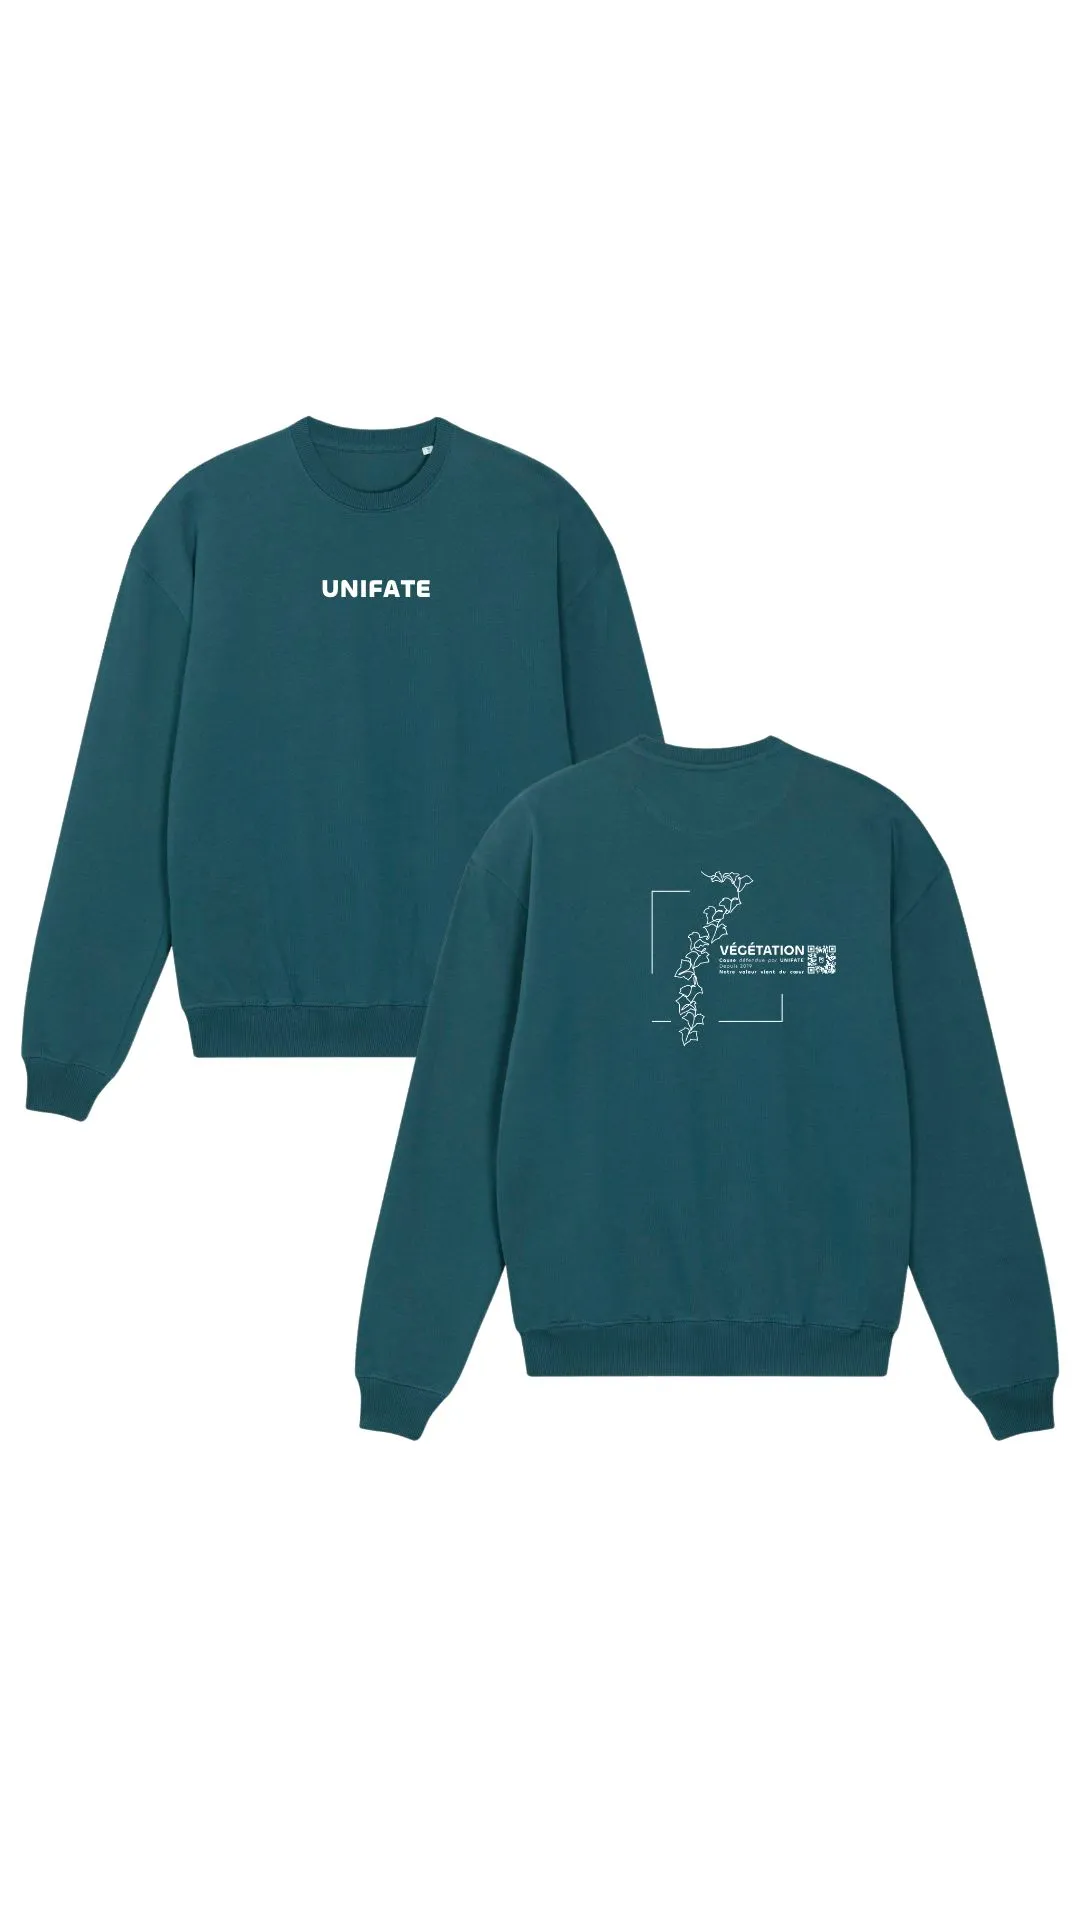 unifate-marque-responsable-rennes-collection-flore-ete-sweat-turquoise